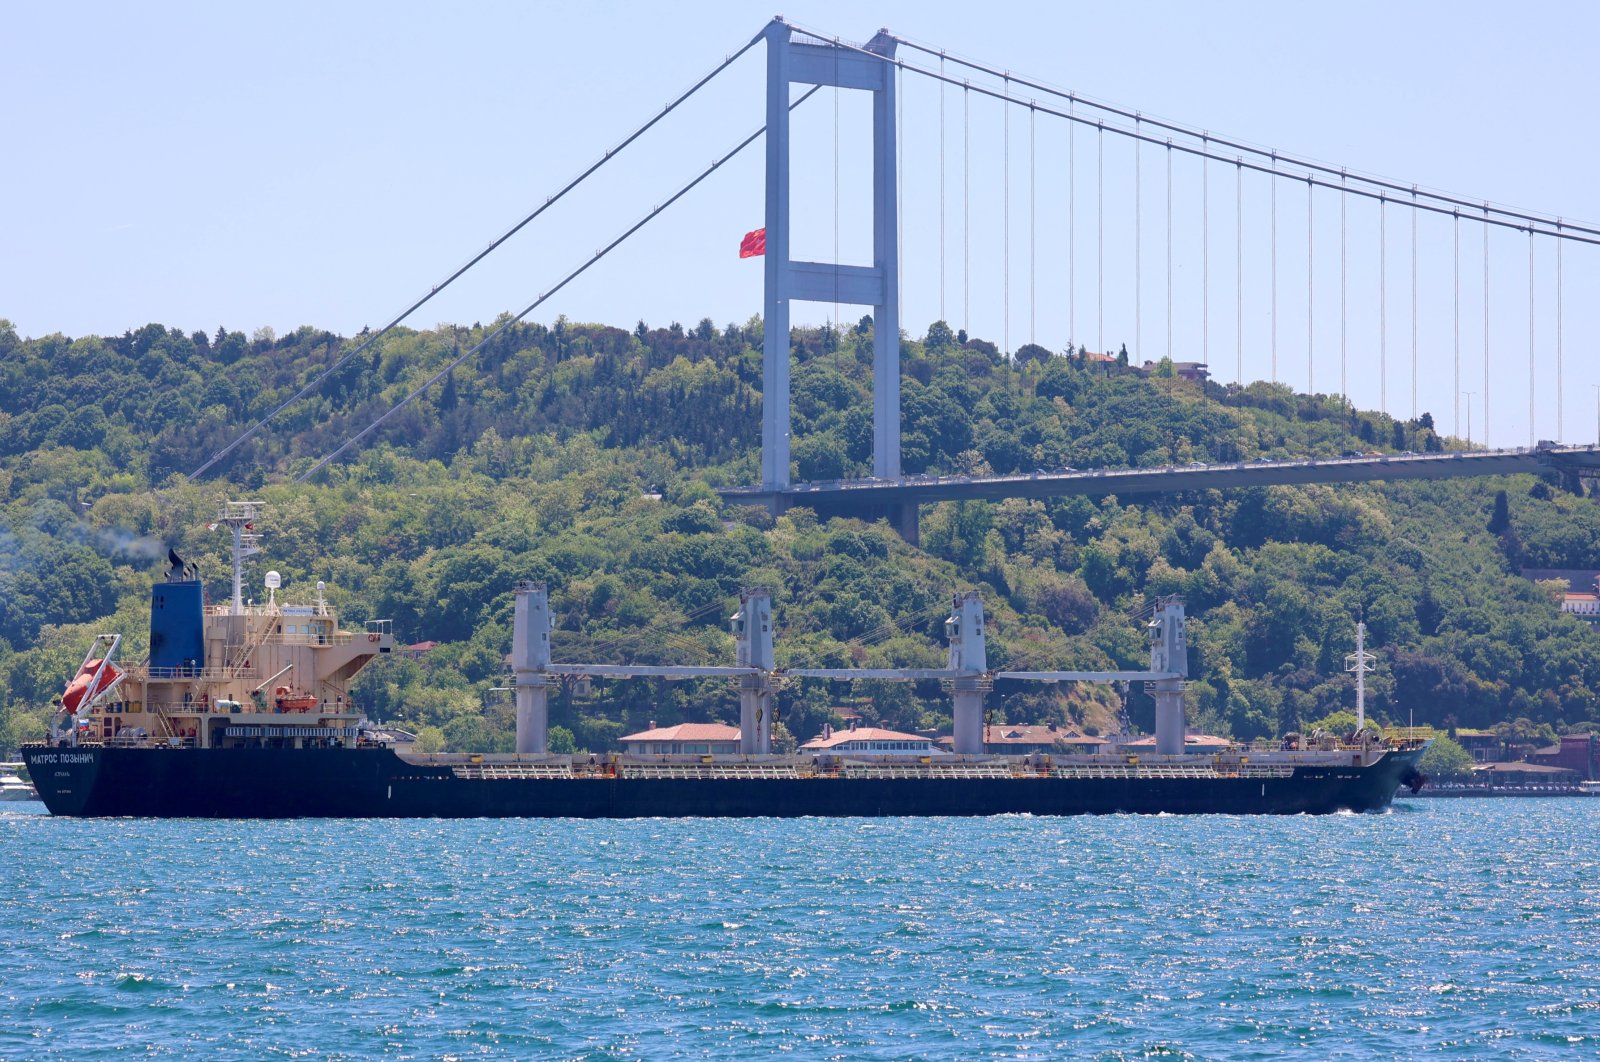 Russian-flagged bulk carrier Matros Pozynich sails in the Bosporus, on its way to the Mediterranean Sea, in Istanbul, Turkey, May 22, 2022. (Reuters Photo)